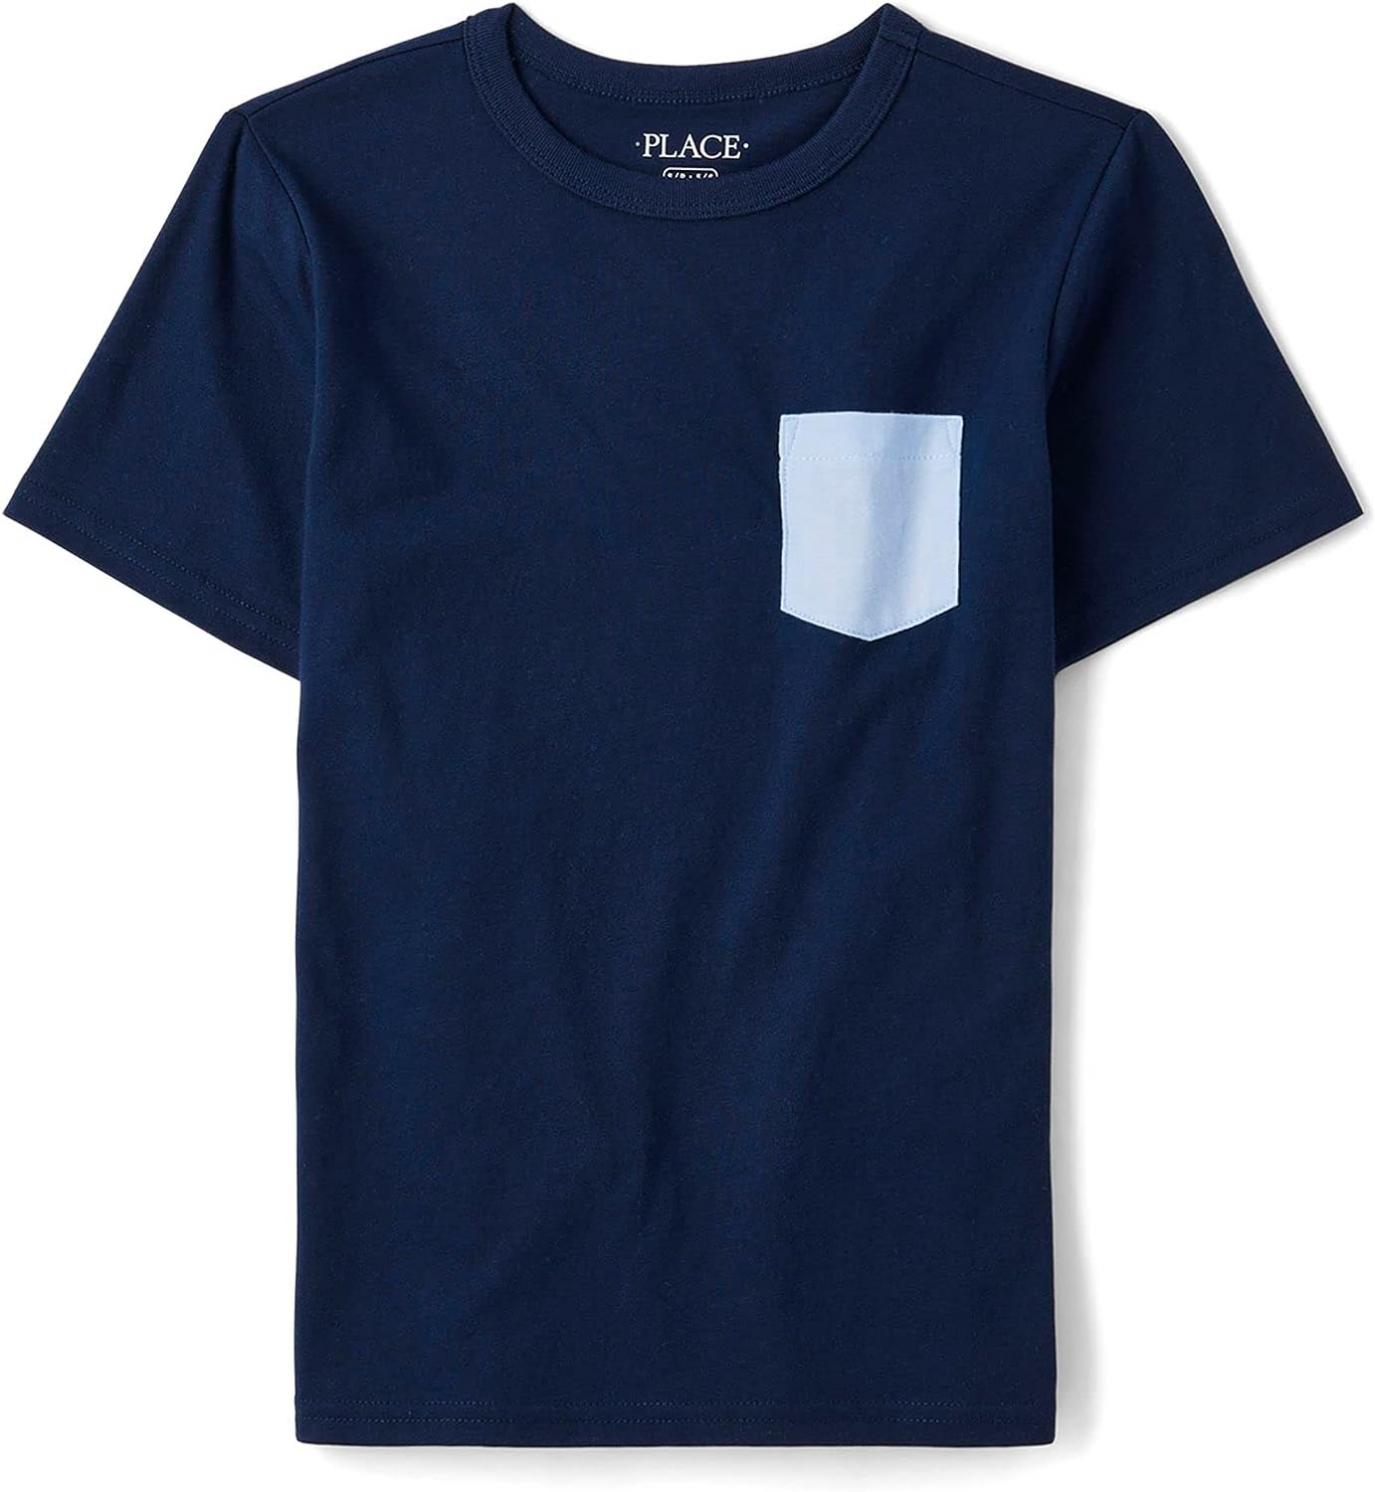 The Children's Place Boys' Short Sleeve Pocket Top